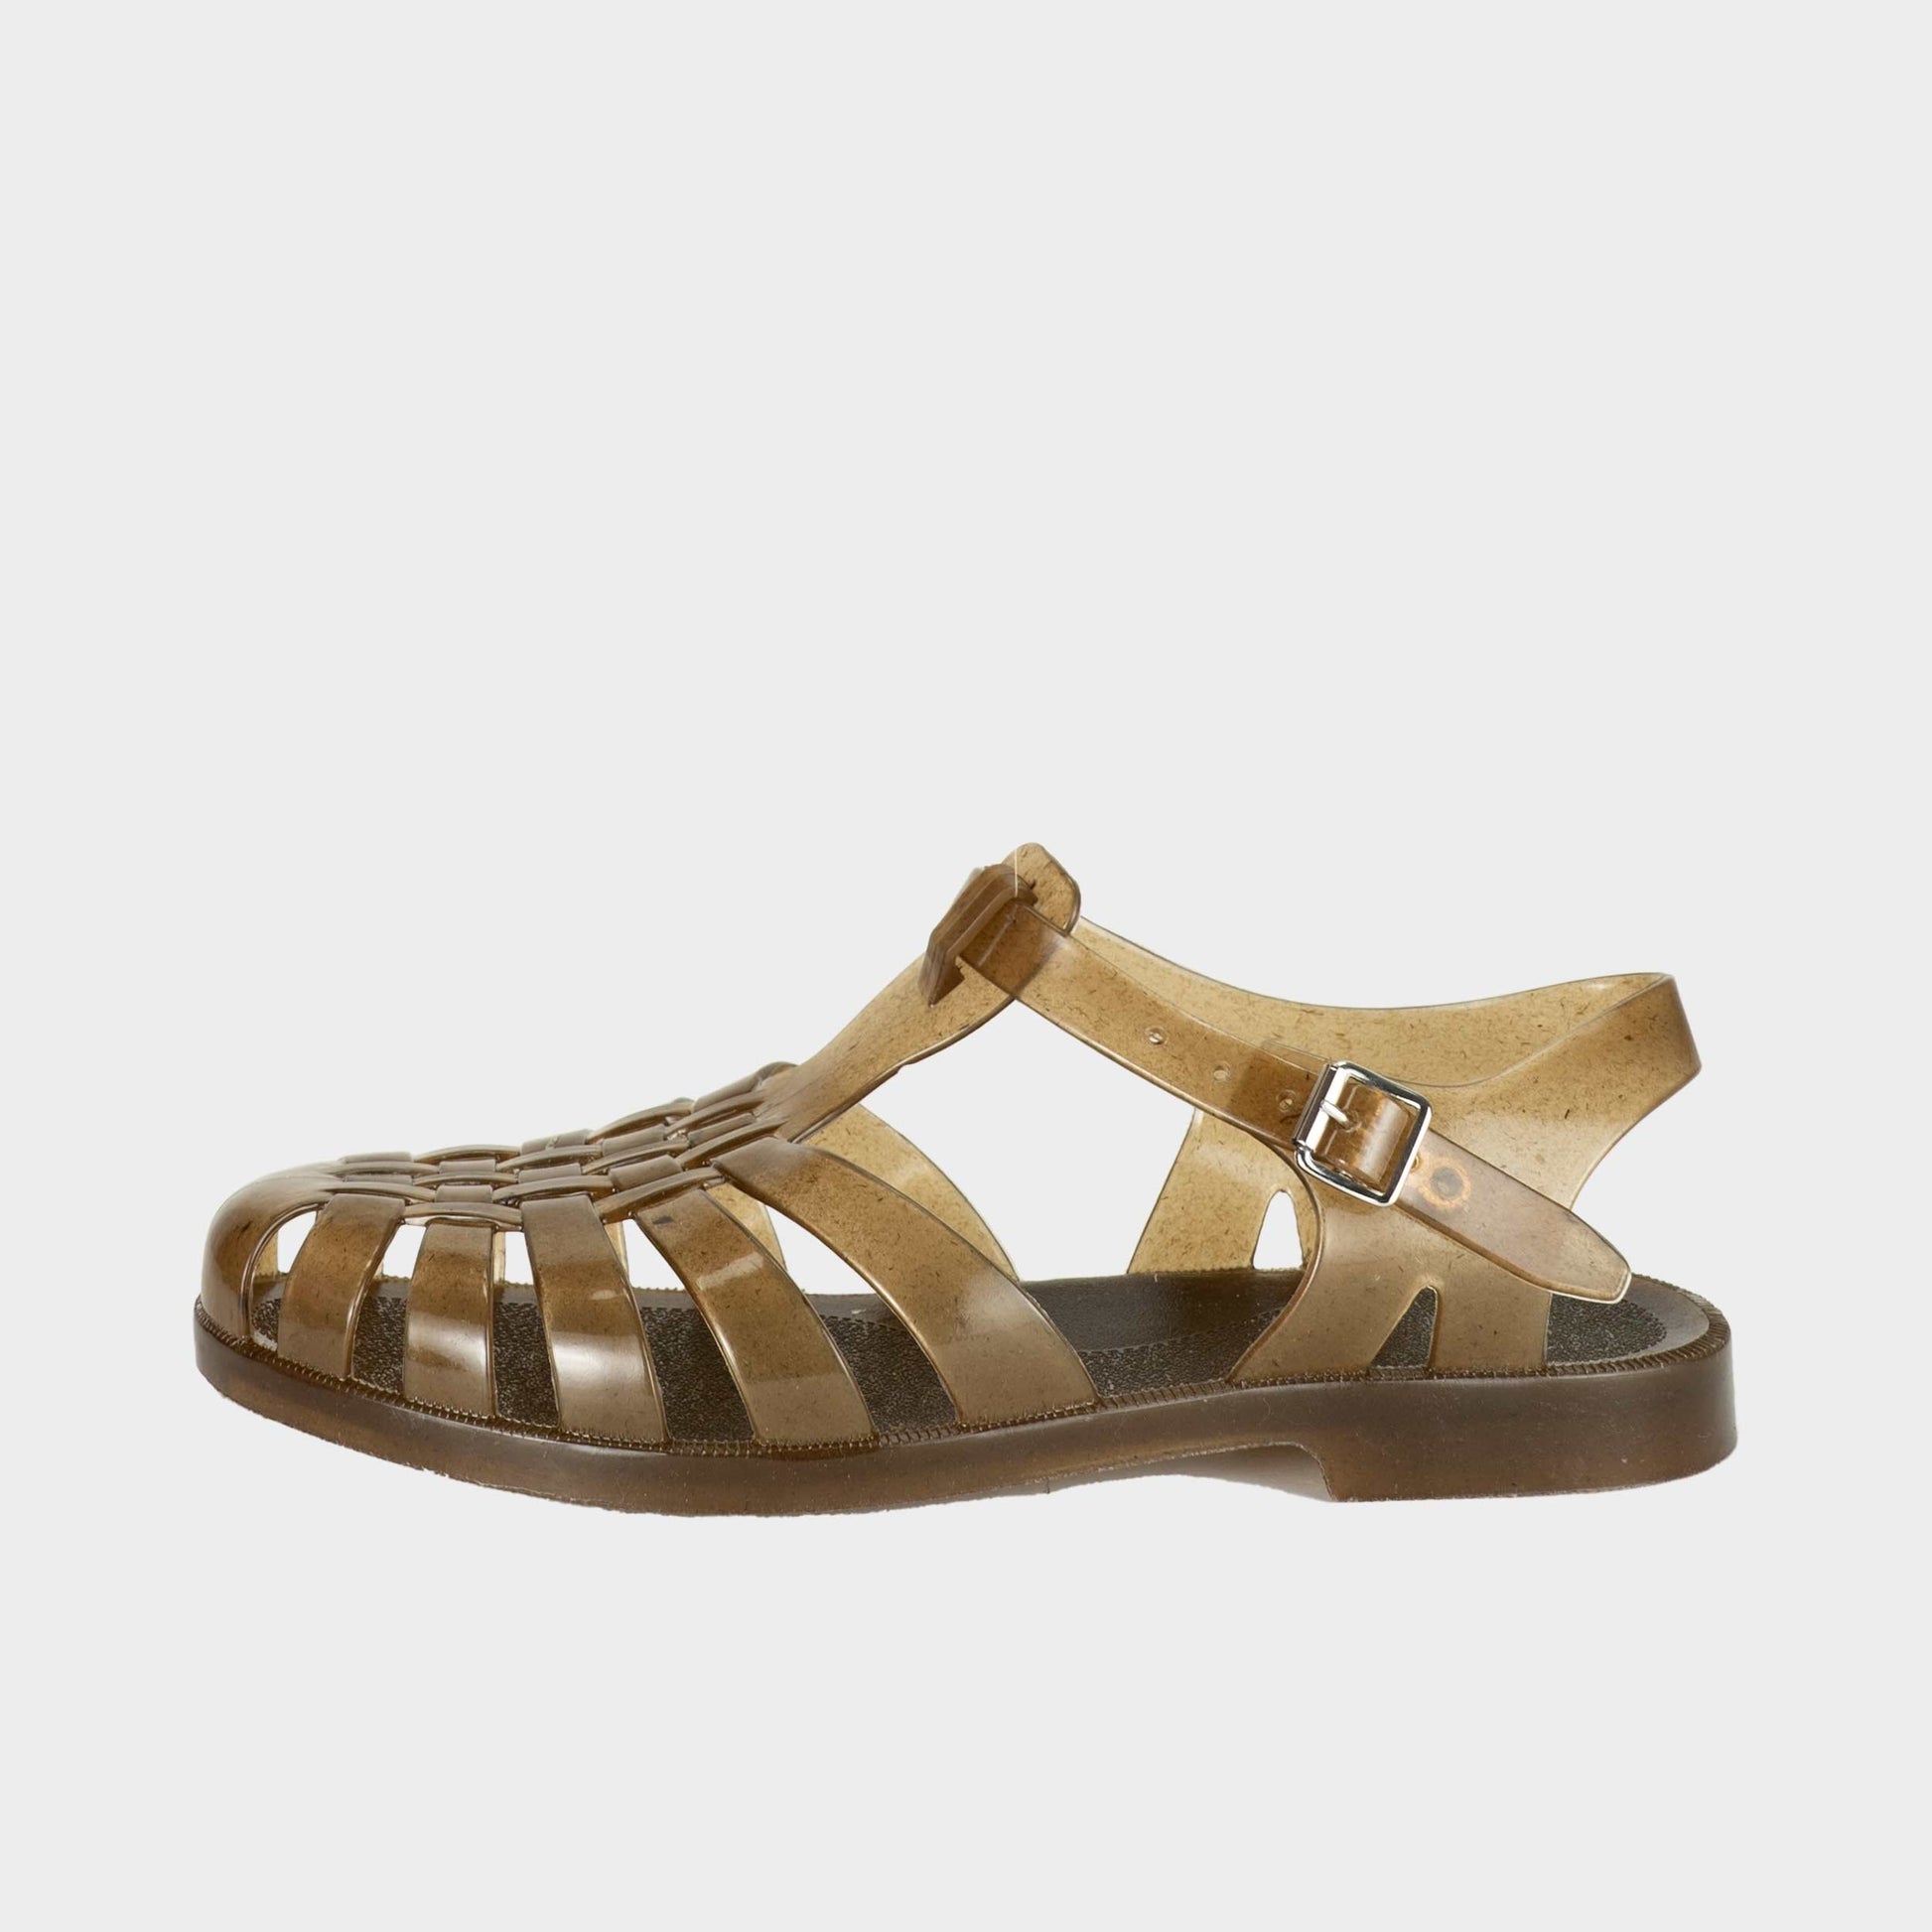 French Recycled Hemp Fisherman Sandals in Sepia